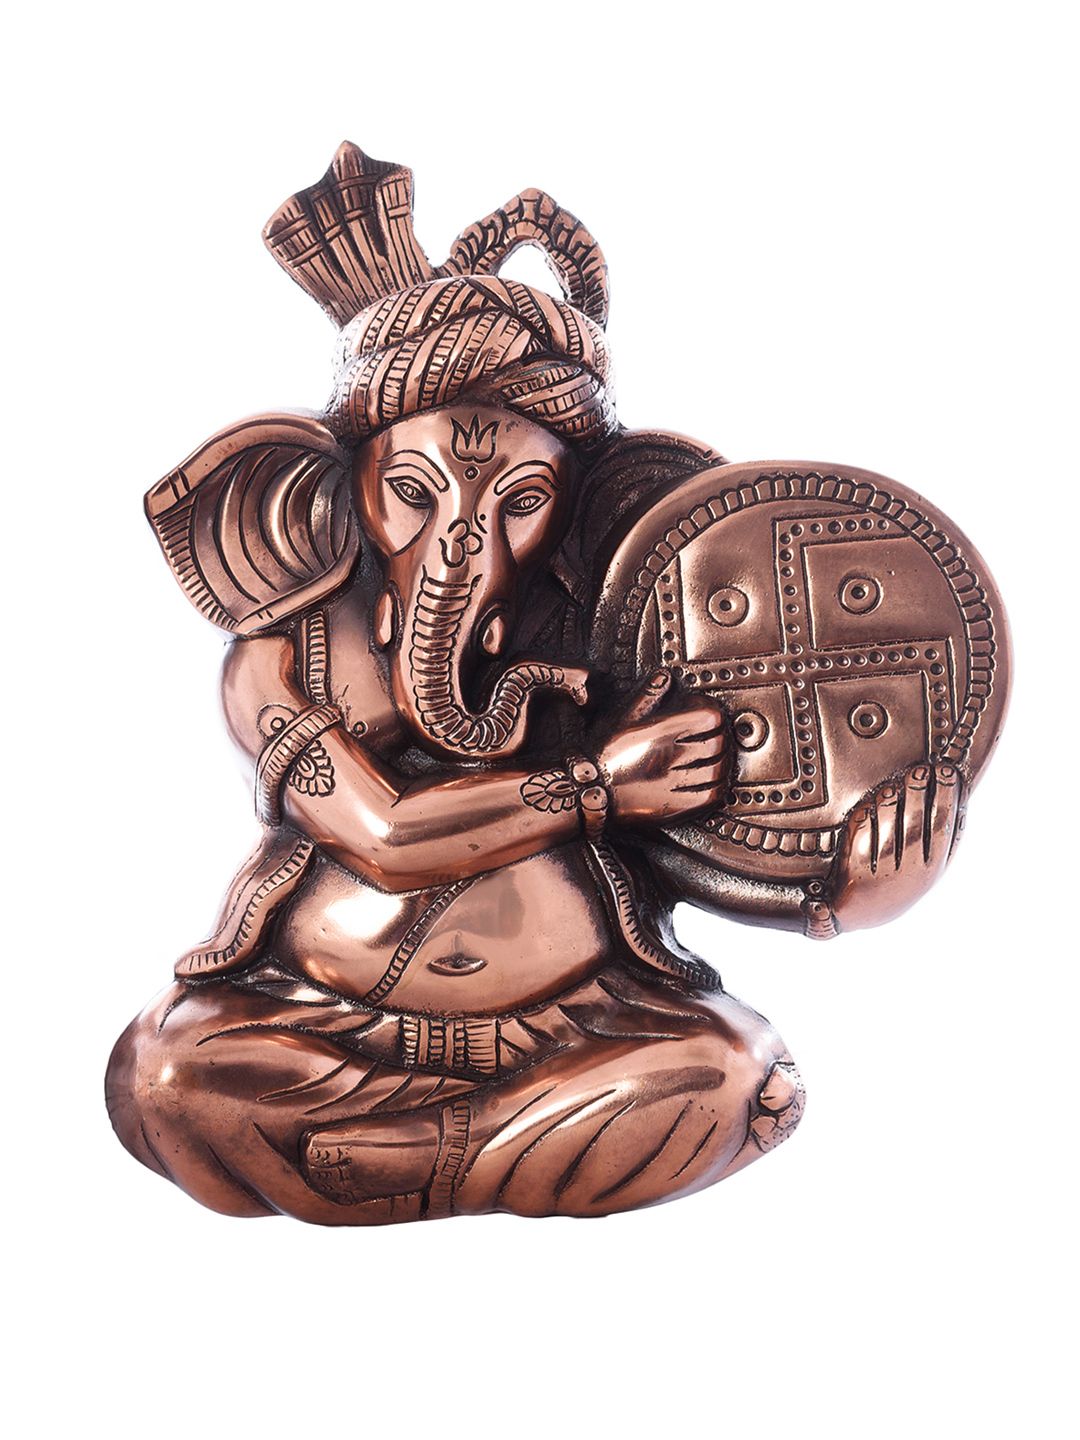 eCraftIndia Copper-Toned Metal Lord Ganesh Idol Wall Hanging Price in India